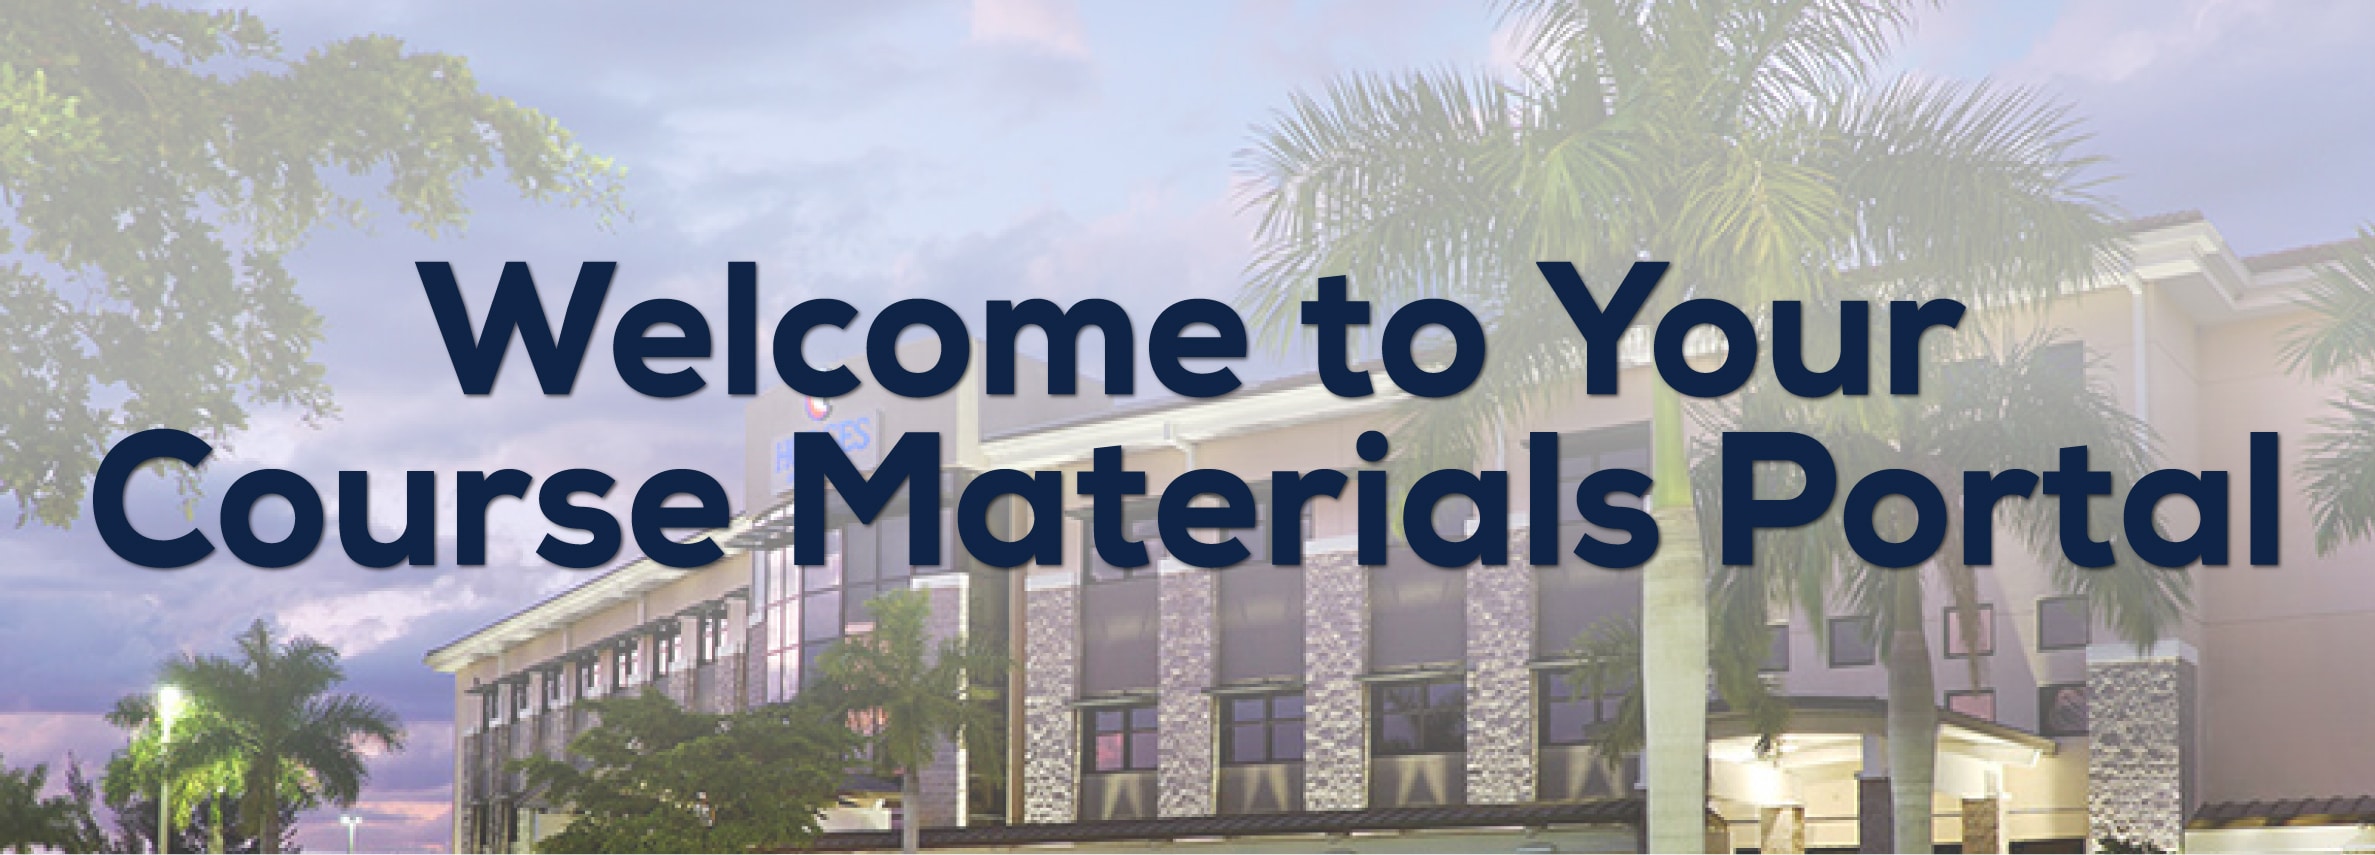 Welcome to your course materials portal